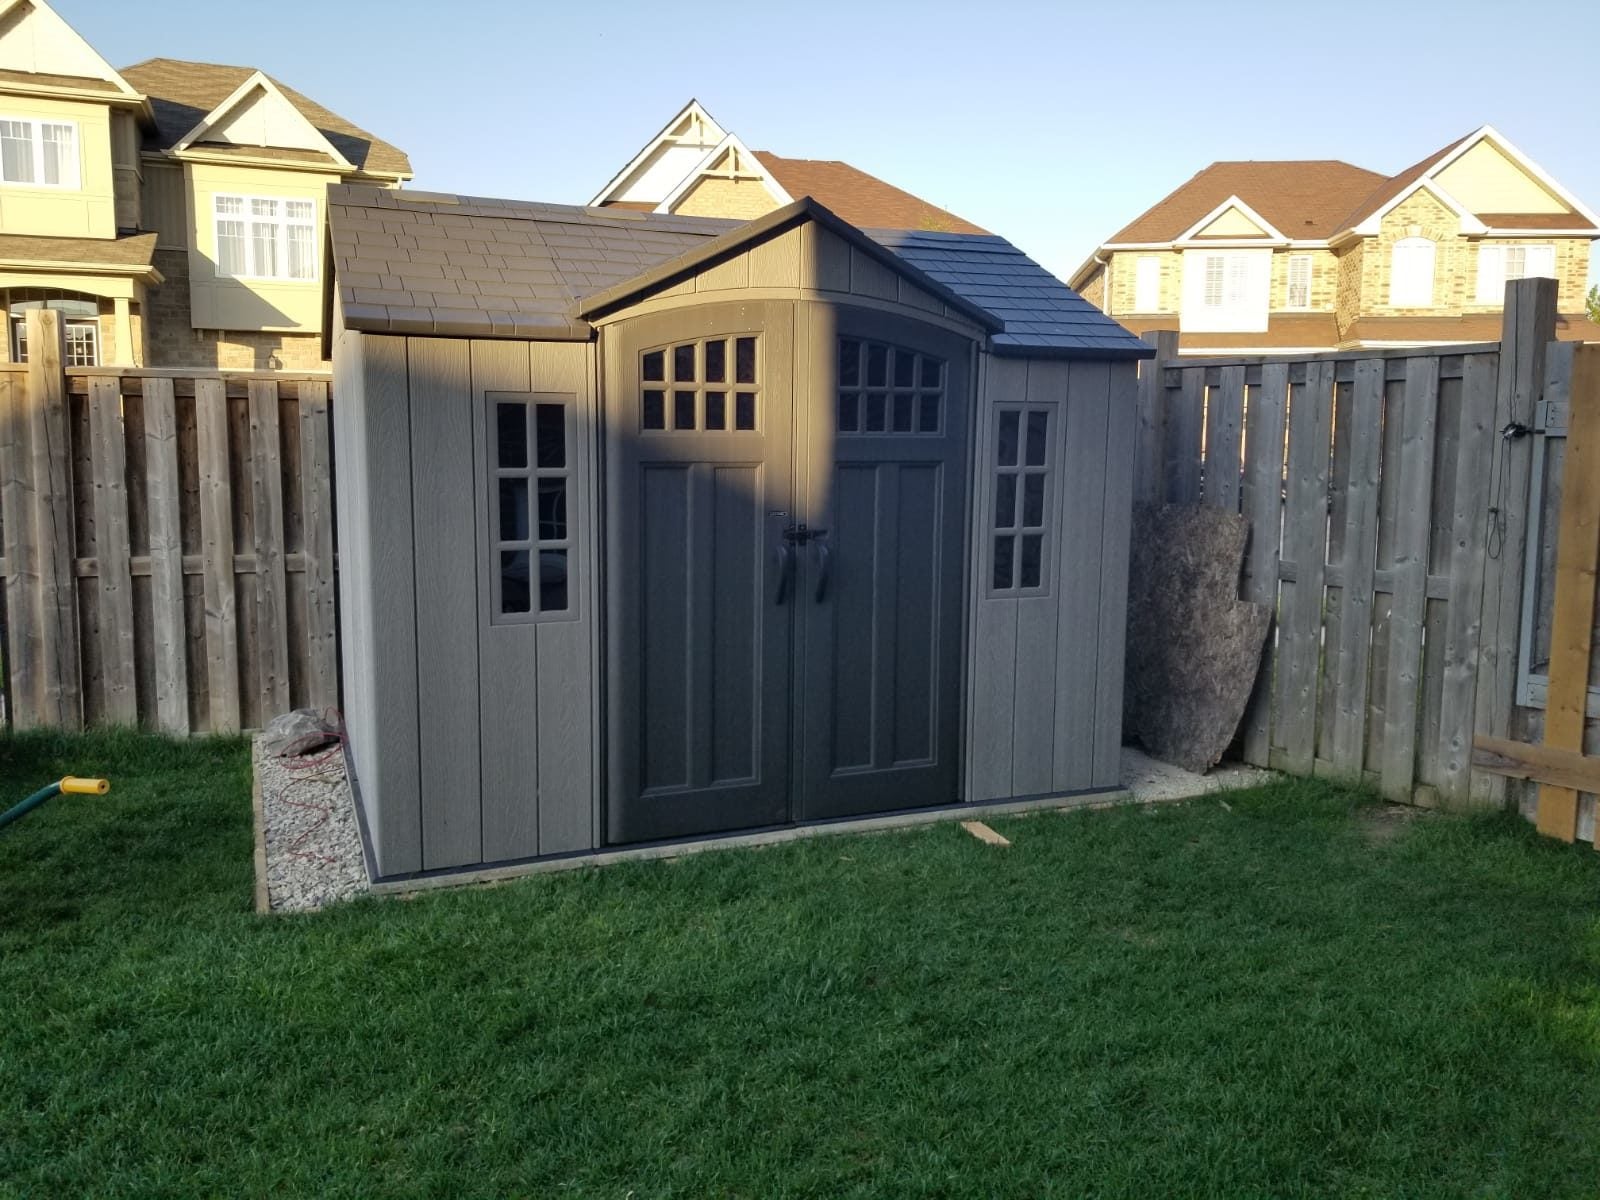 Costco Lifetime 10 ft x 8 ft Shed in store 9.99 - Page 4 